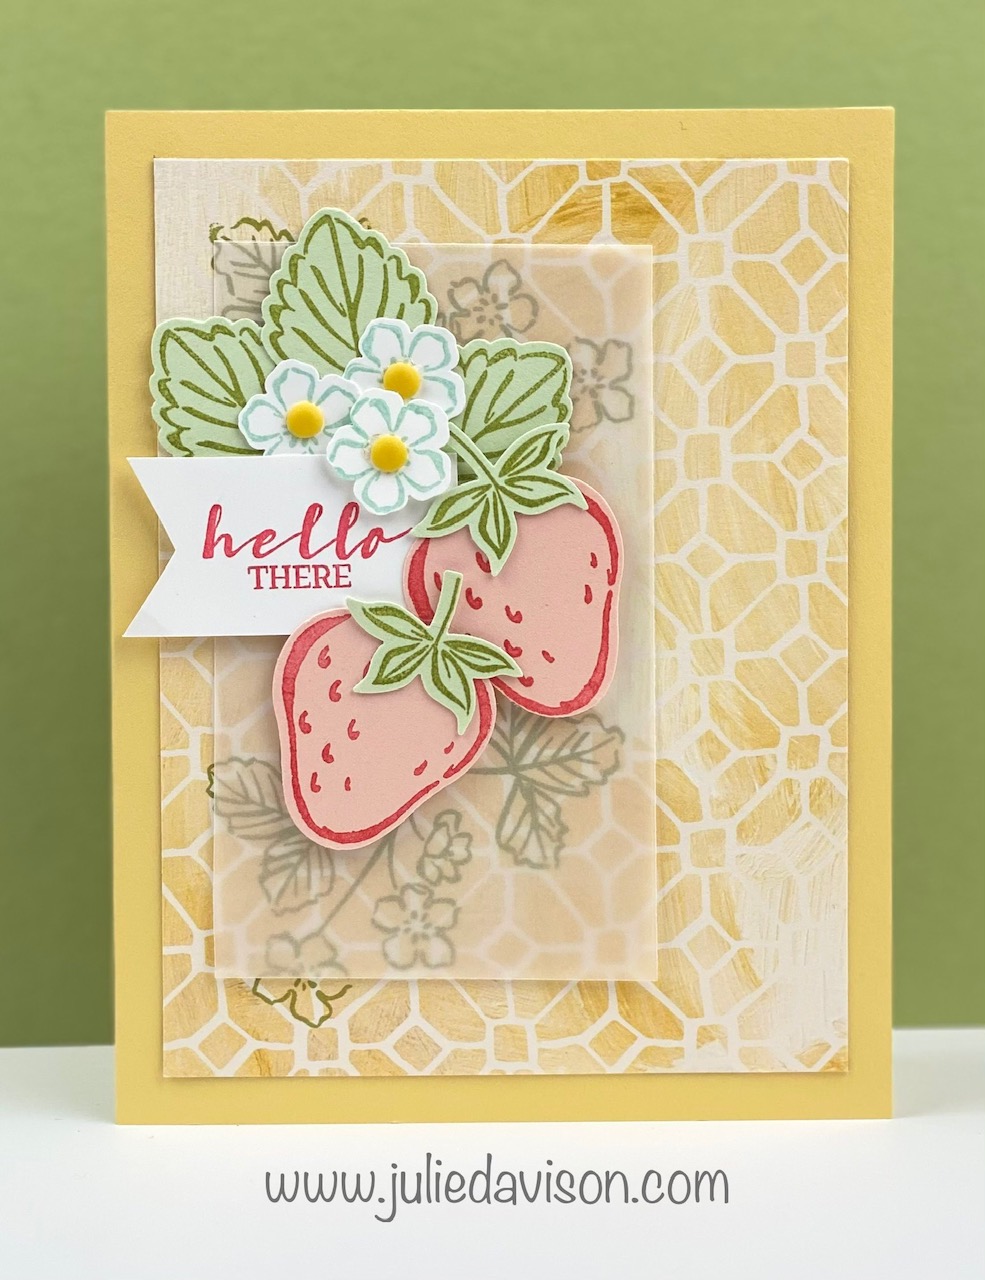 Julie's Stamping Spot -- Stampin' Up! Project Ideas by Julie